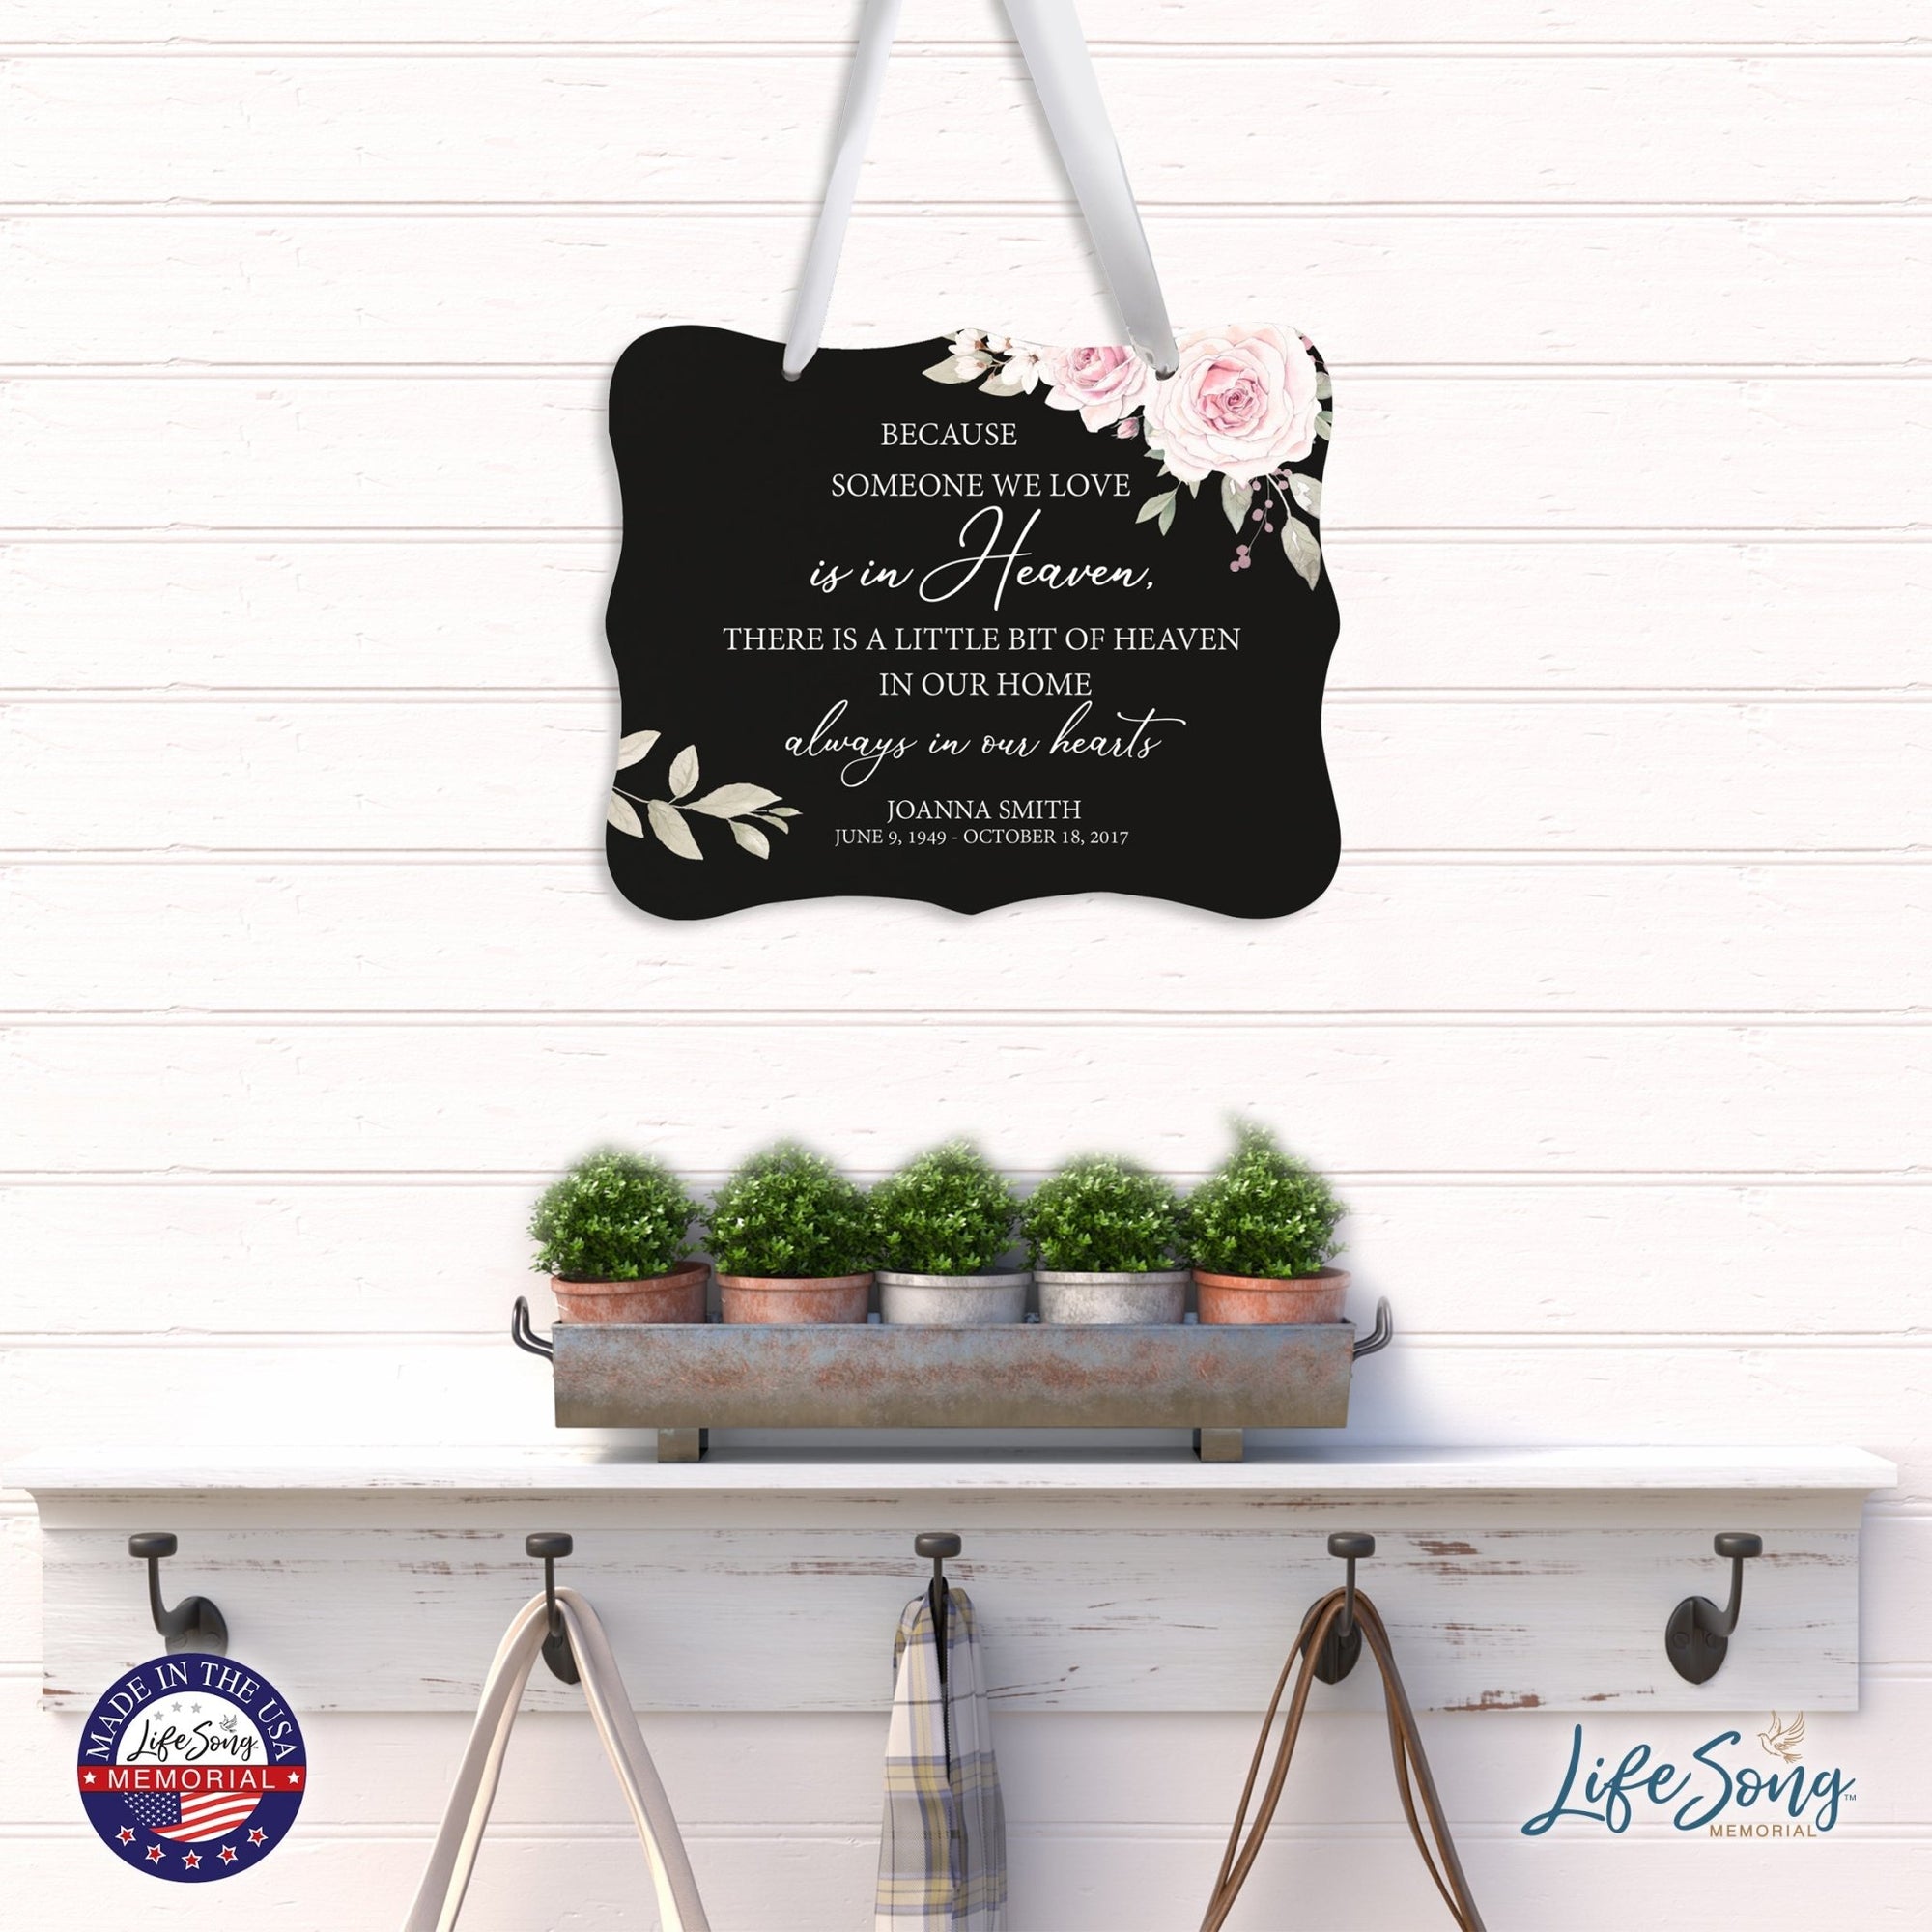 Custom Wooden Memorial 6x8 Ribbon Wall Sign Hanging Decor for Loss of Loved One Because Someone (Black) - LifeSong Milestones